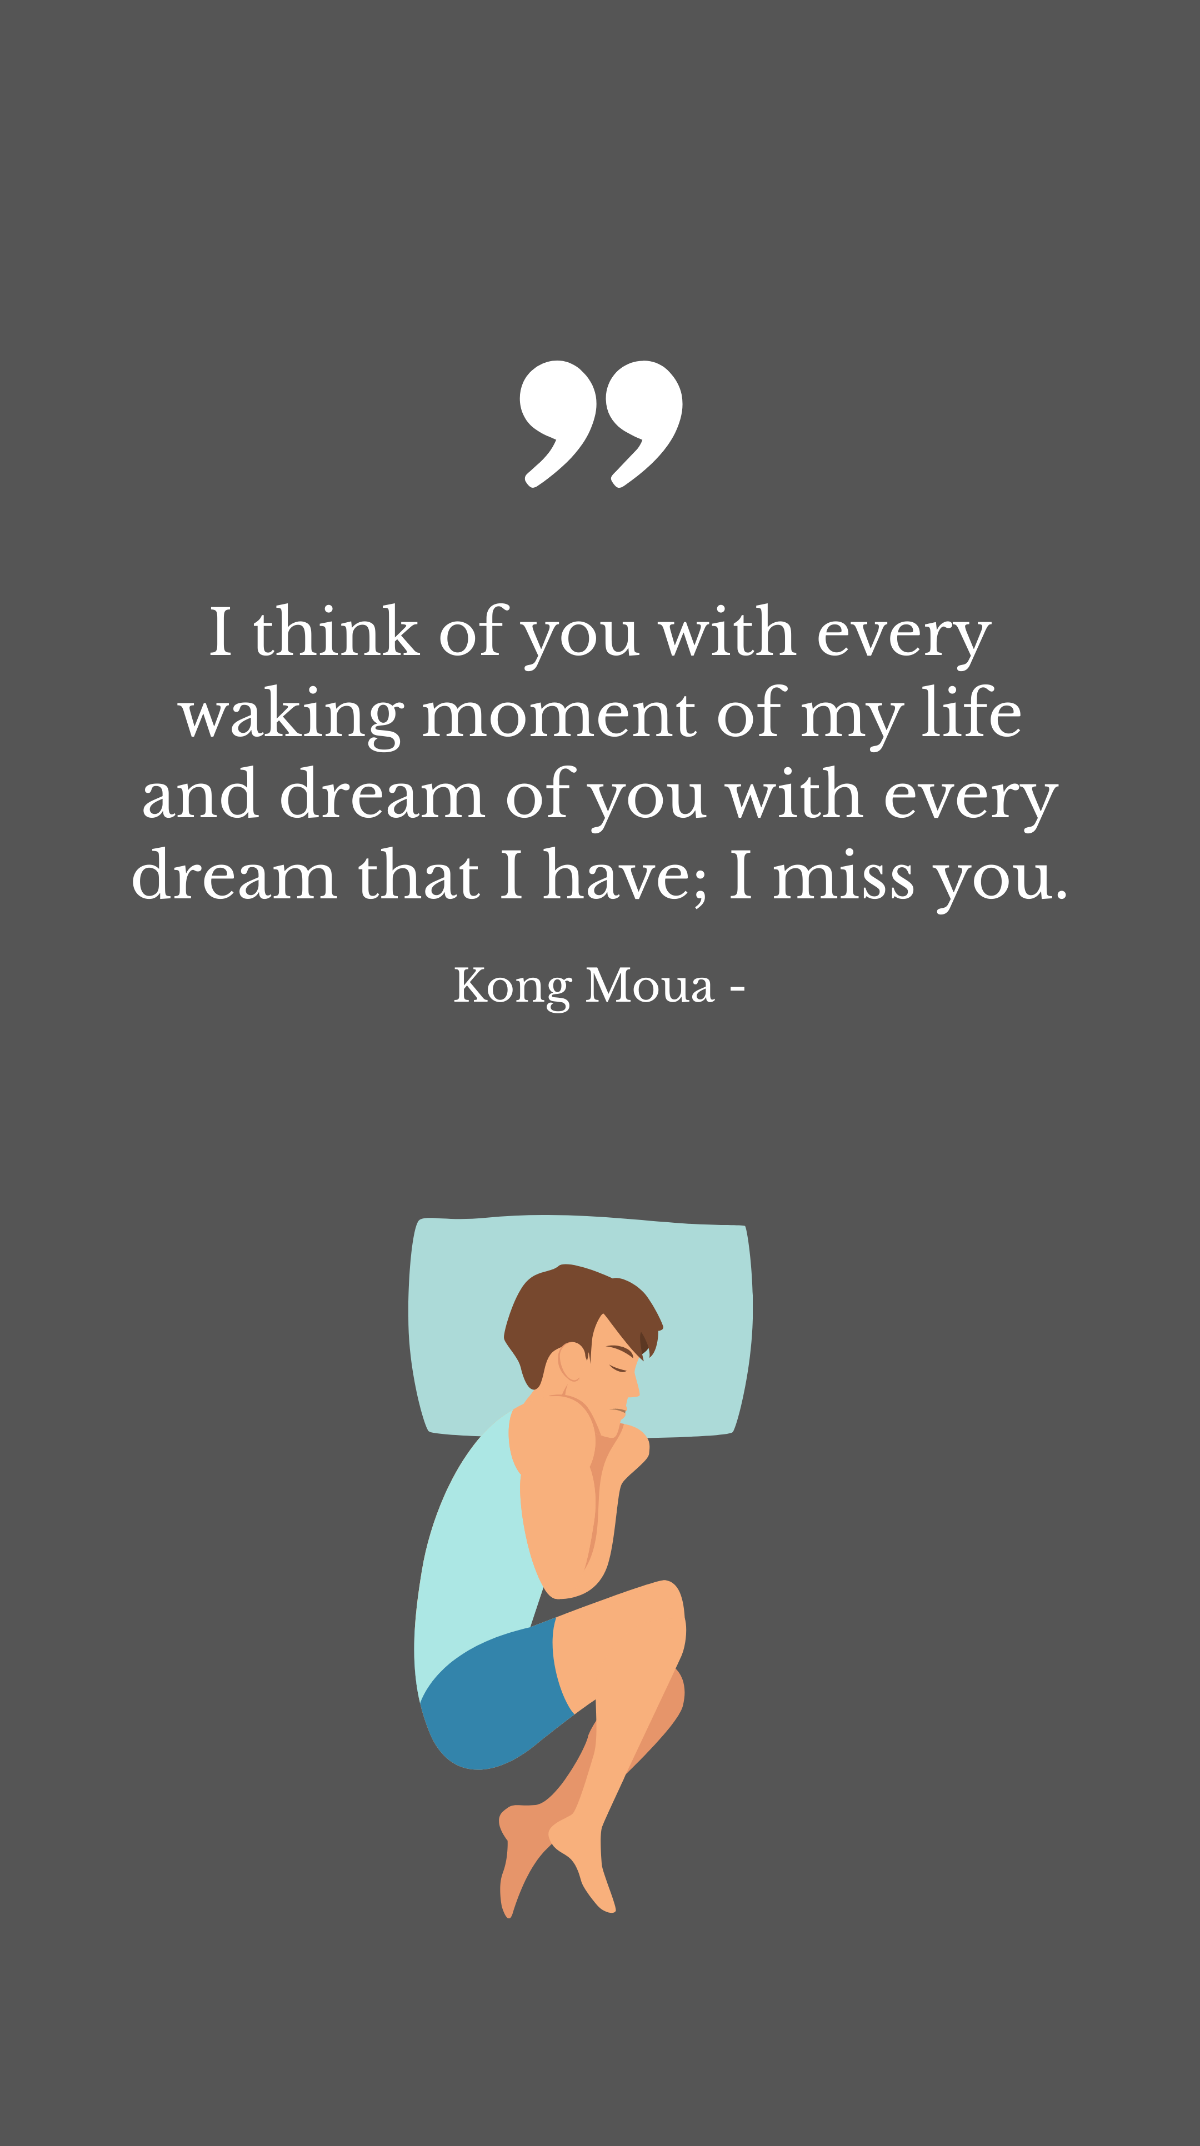 Kong Moua - I think of you with every waking moment of my life and dream of you with every dream that I have; I miss you.